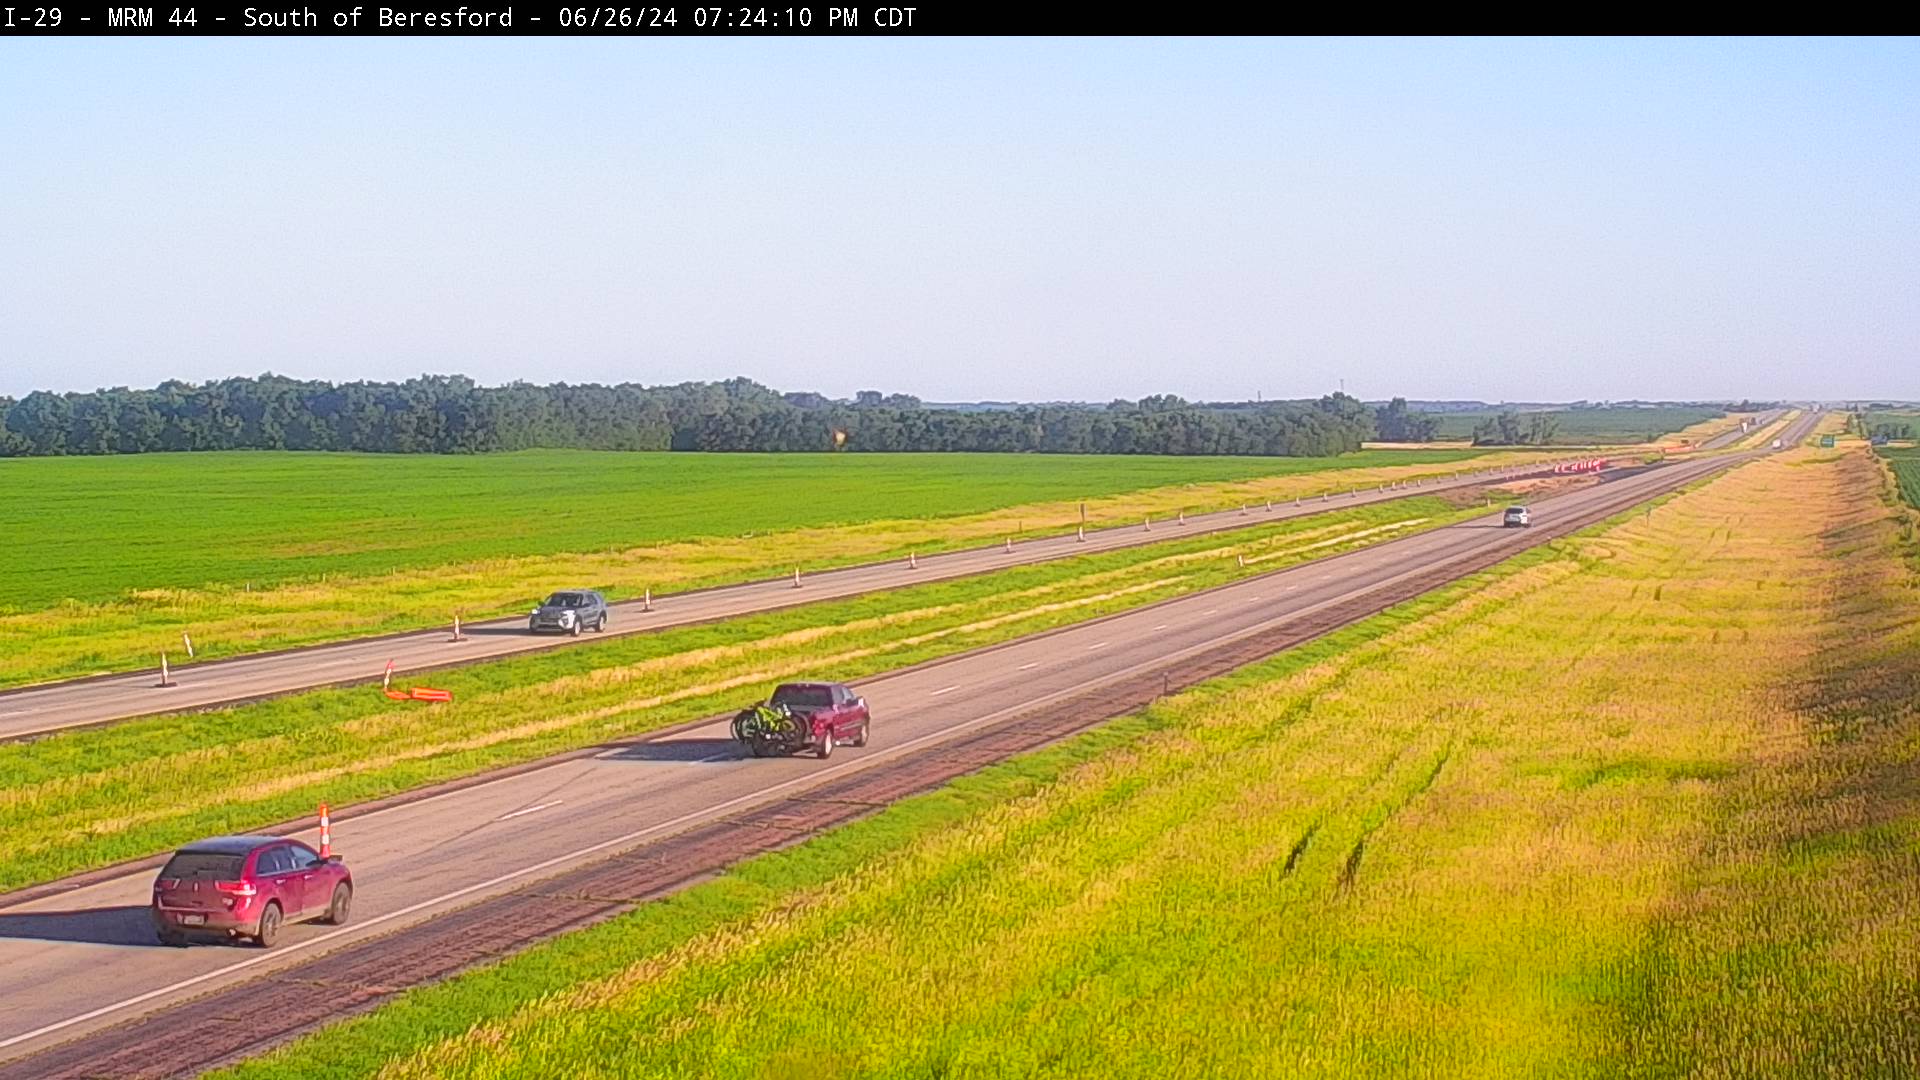 2 miles south of town along I-29 @ MP 44 - South Traffic Camera